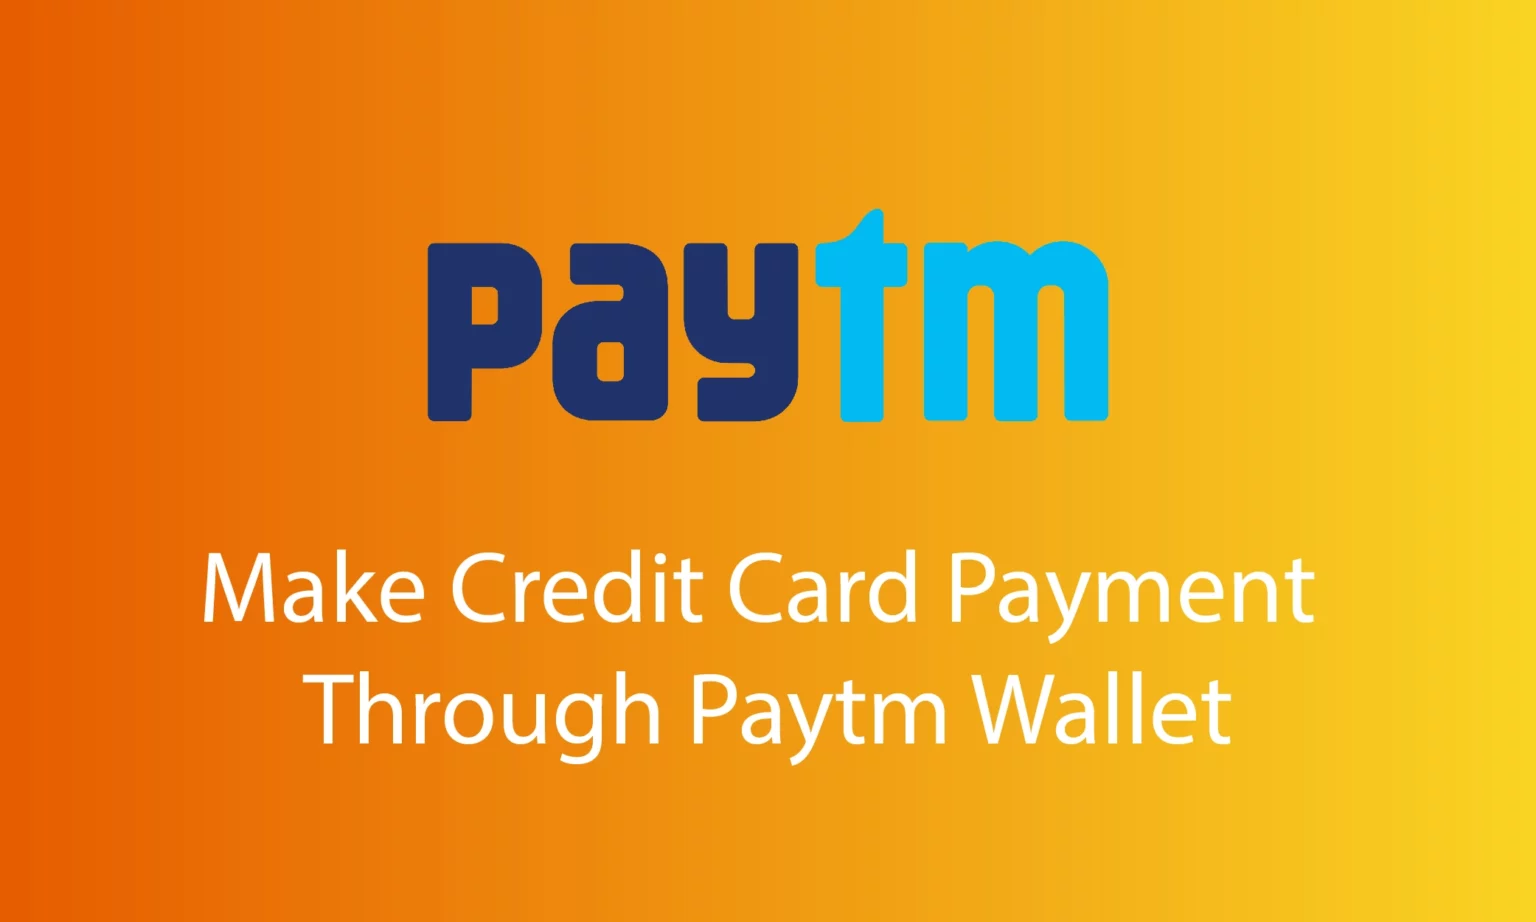 How to Make Credit Card Payment through Paytm Wallet